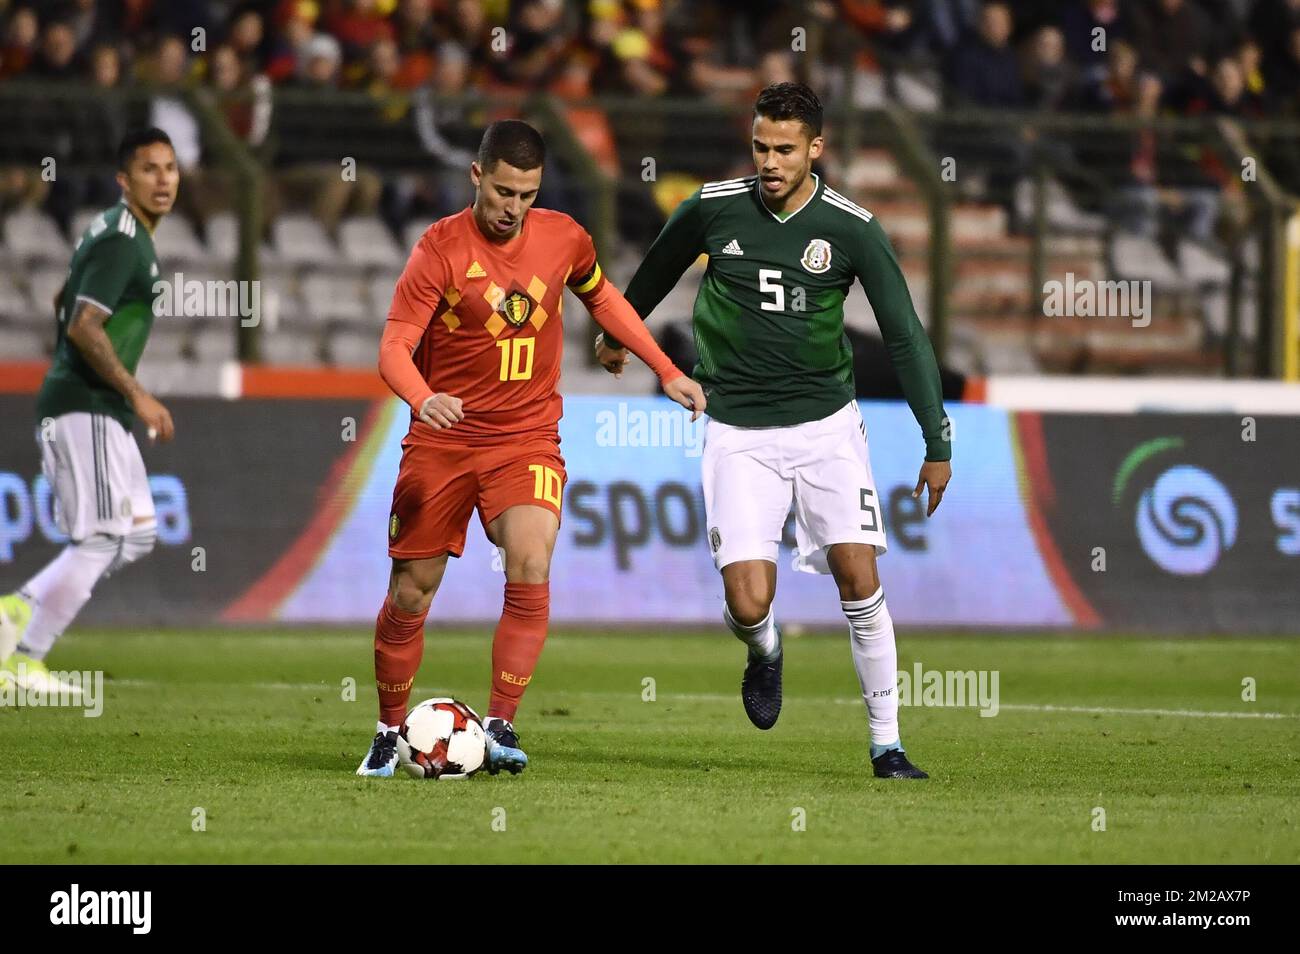 Belgium's Eden Hazard and Mexico's Diego Reyes fight for the ball during a friendly soccer game between Belgian national team Red Devils and Mexico, Friday 10 November 2017, in Brugge. BELGA PHOTO DIRK WAEM Stock Photo